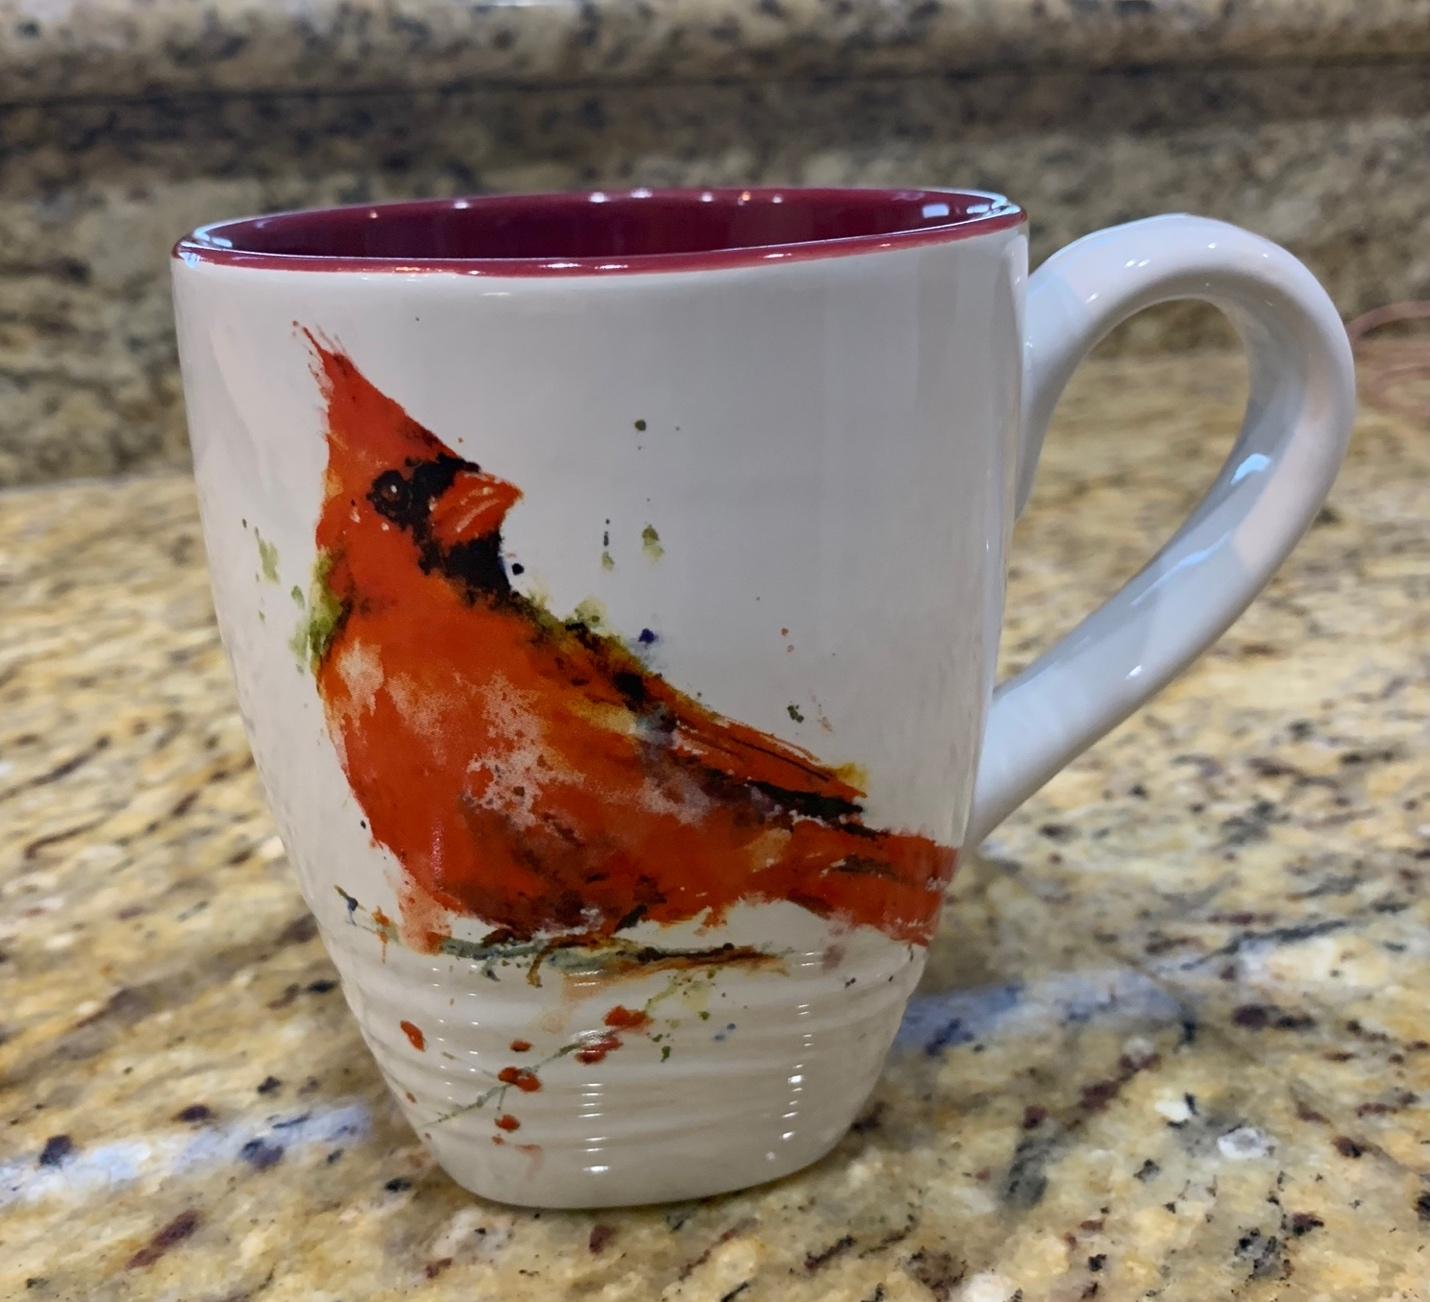 A white and red coffee mug with a bird on it

Description automatically generated